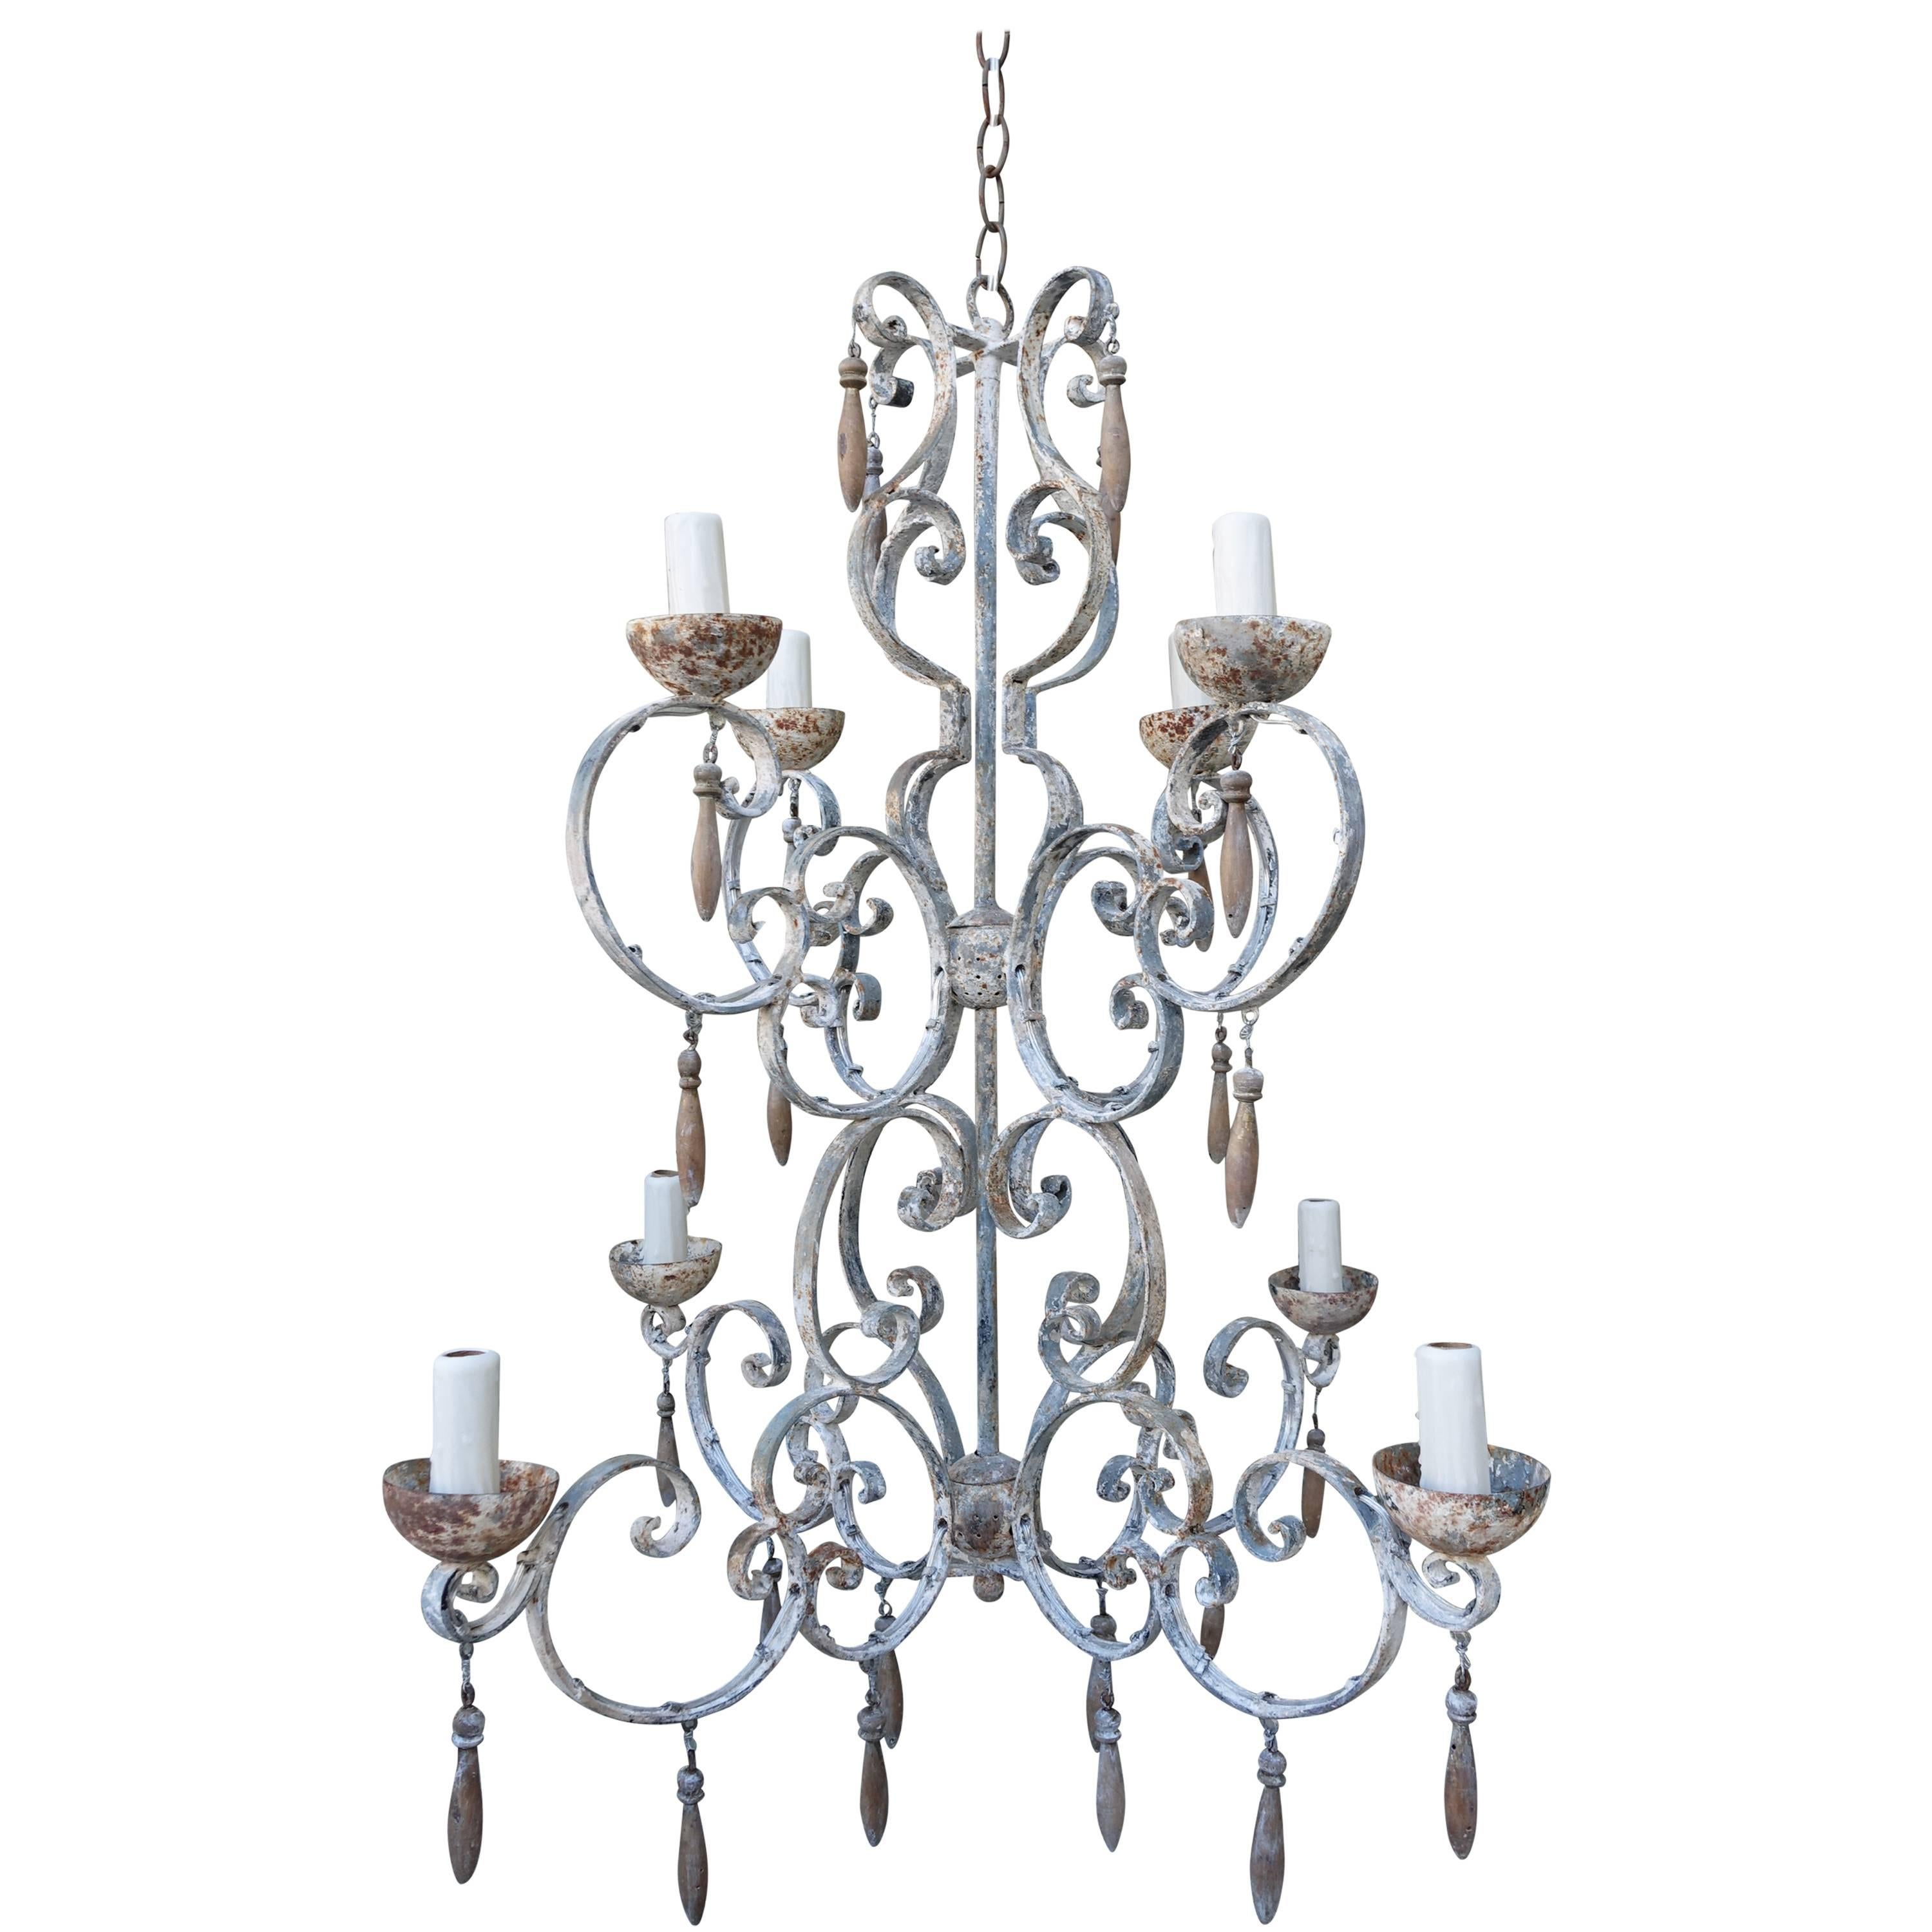 Eight-Light Painted Italian Chandelier with Drops